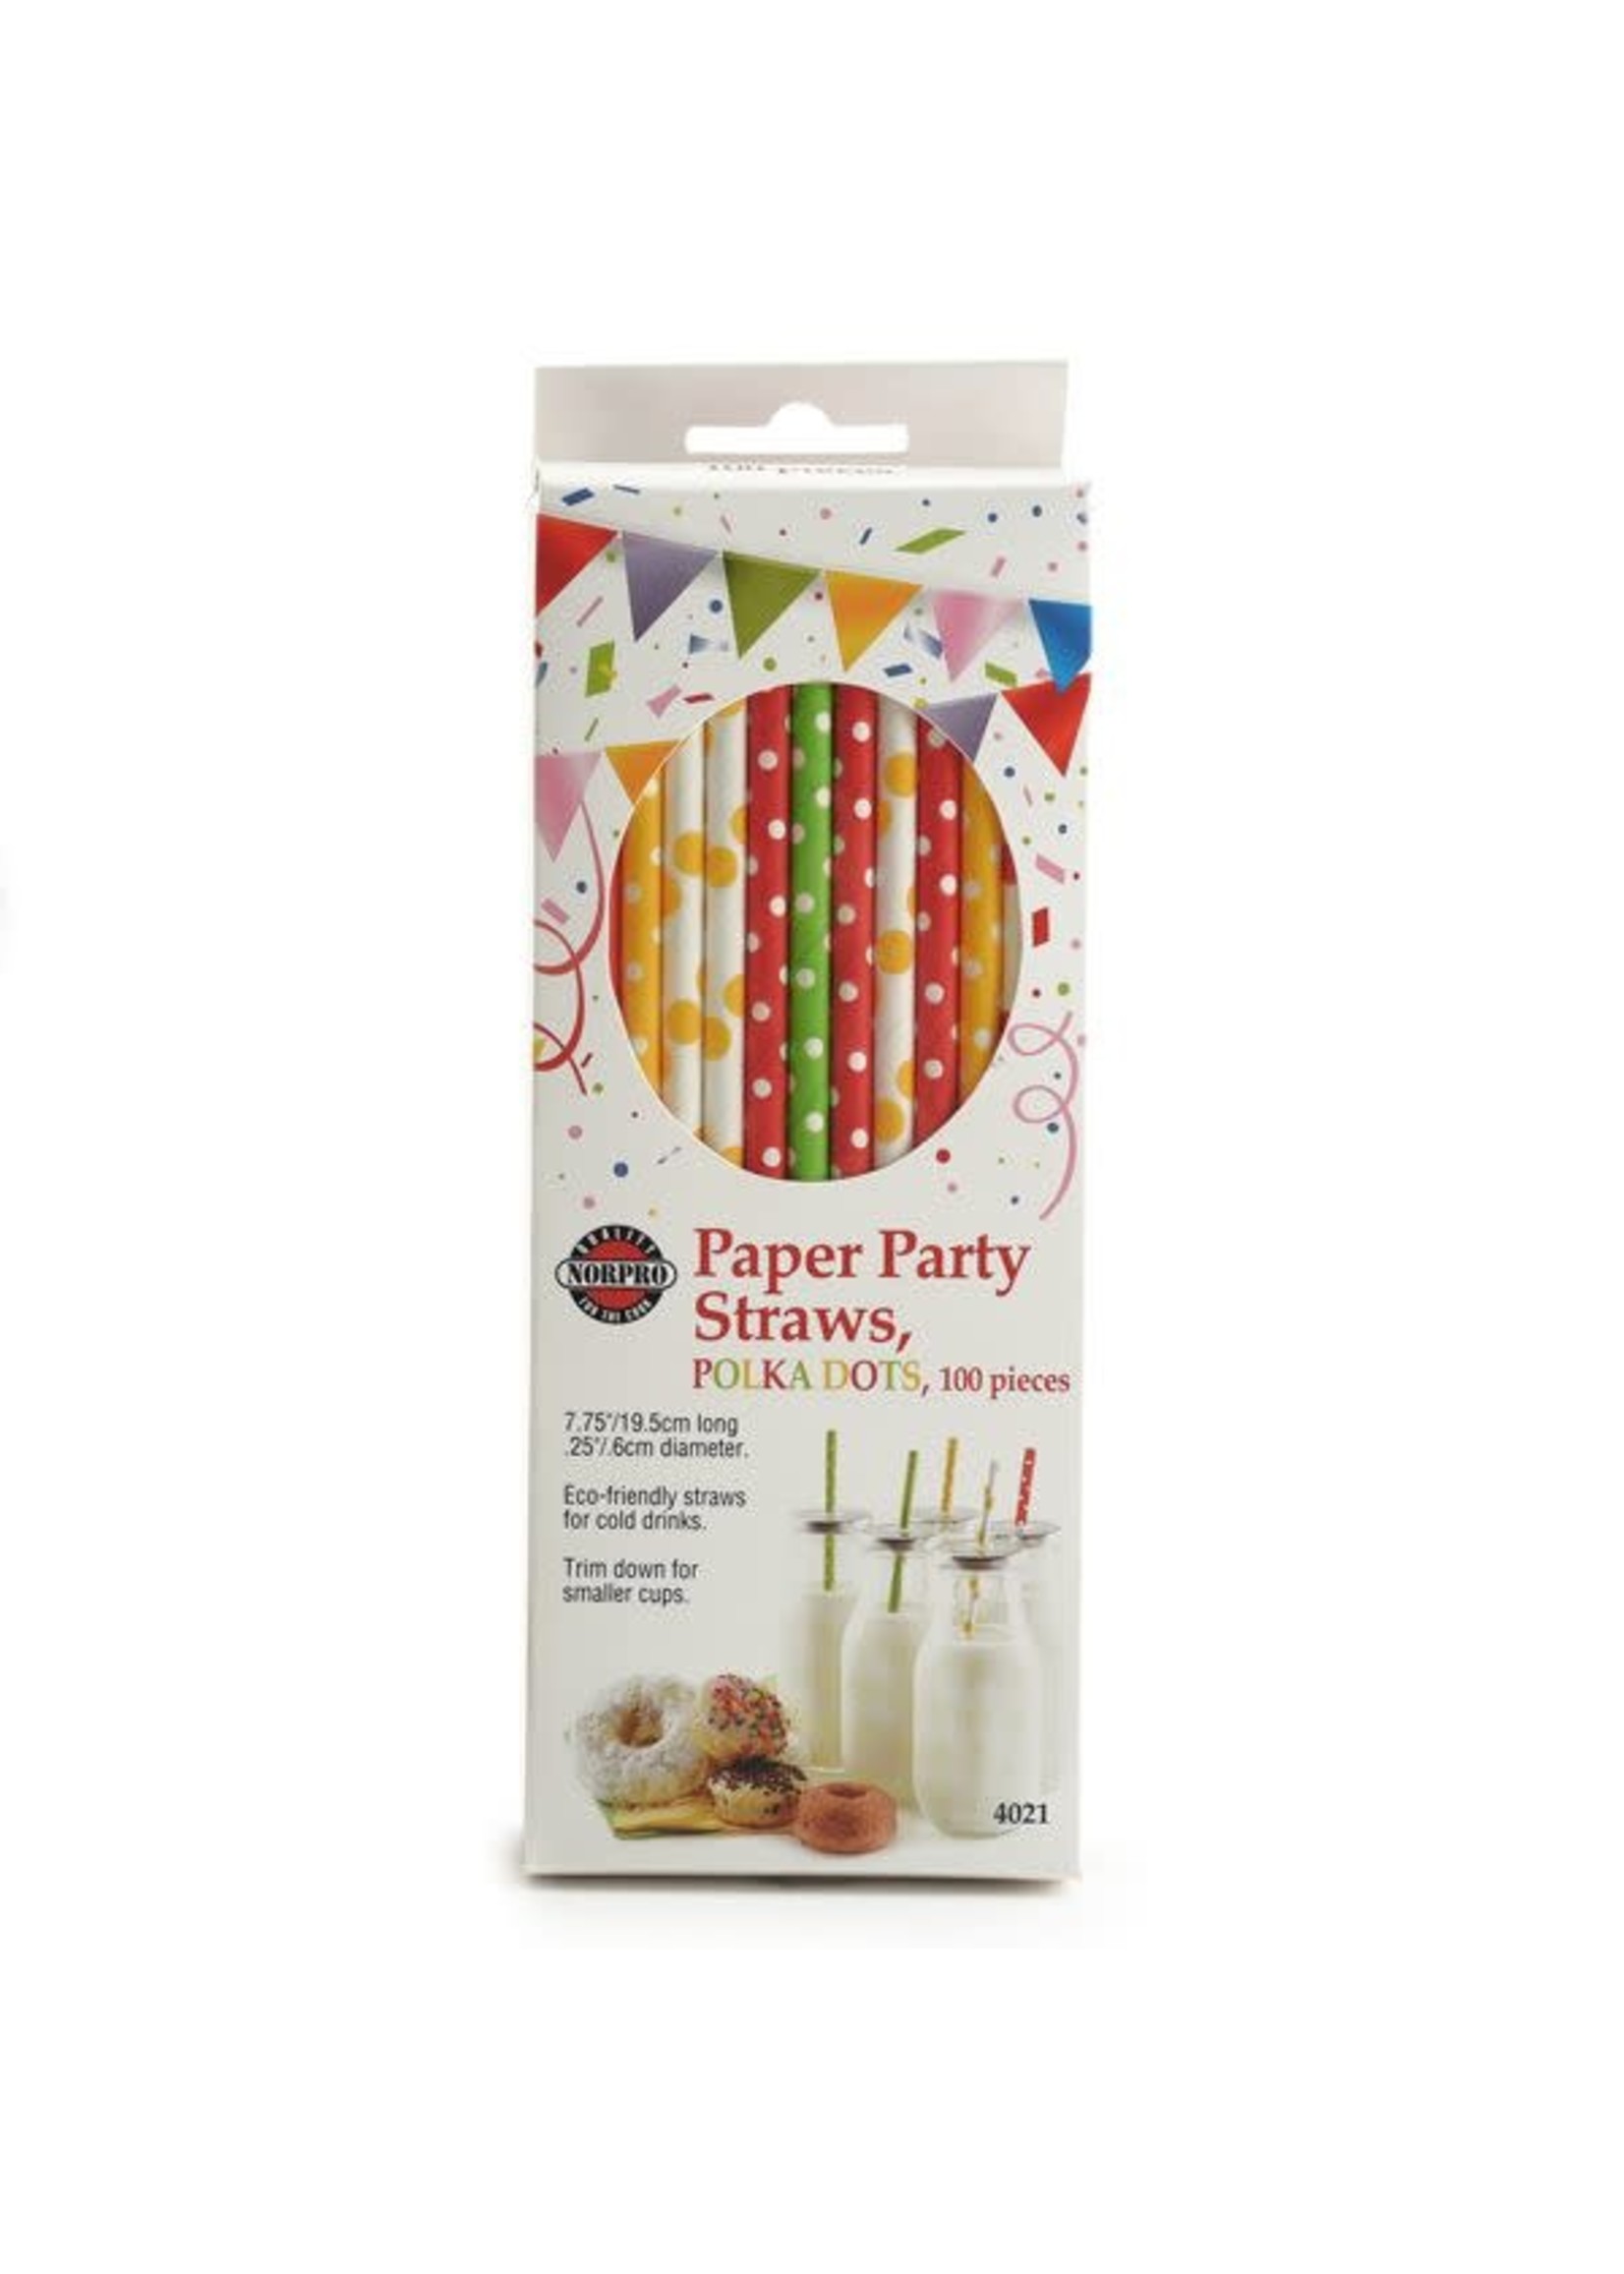 NorPro Paper Party Straws